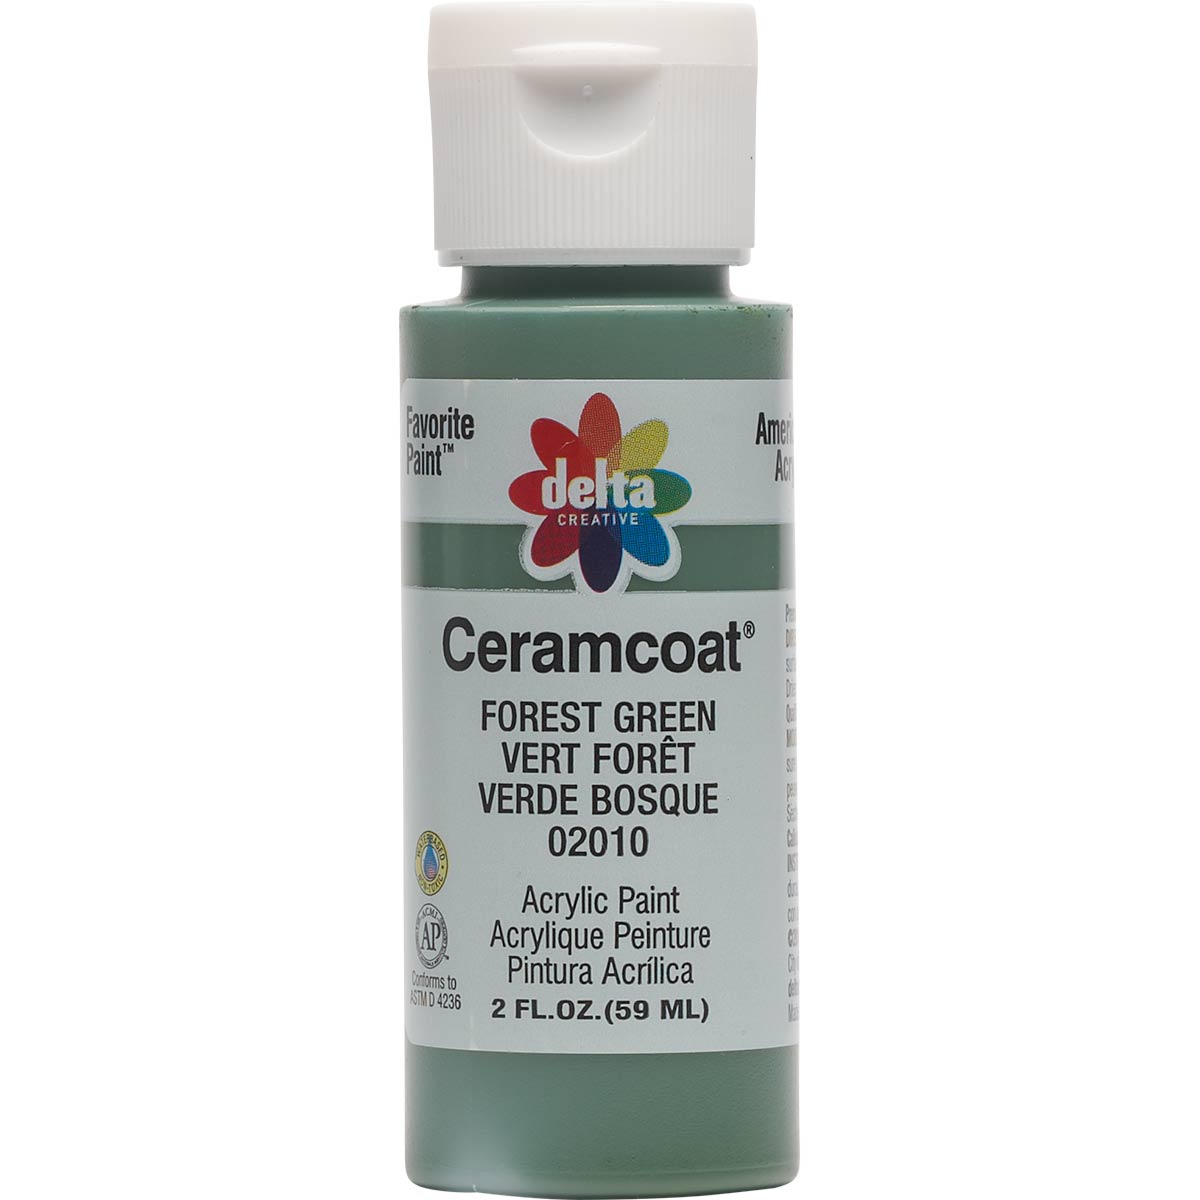 Delta Ceramcoat Acrylic Paint - Forest Green, 2 oz. - 020100202W